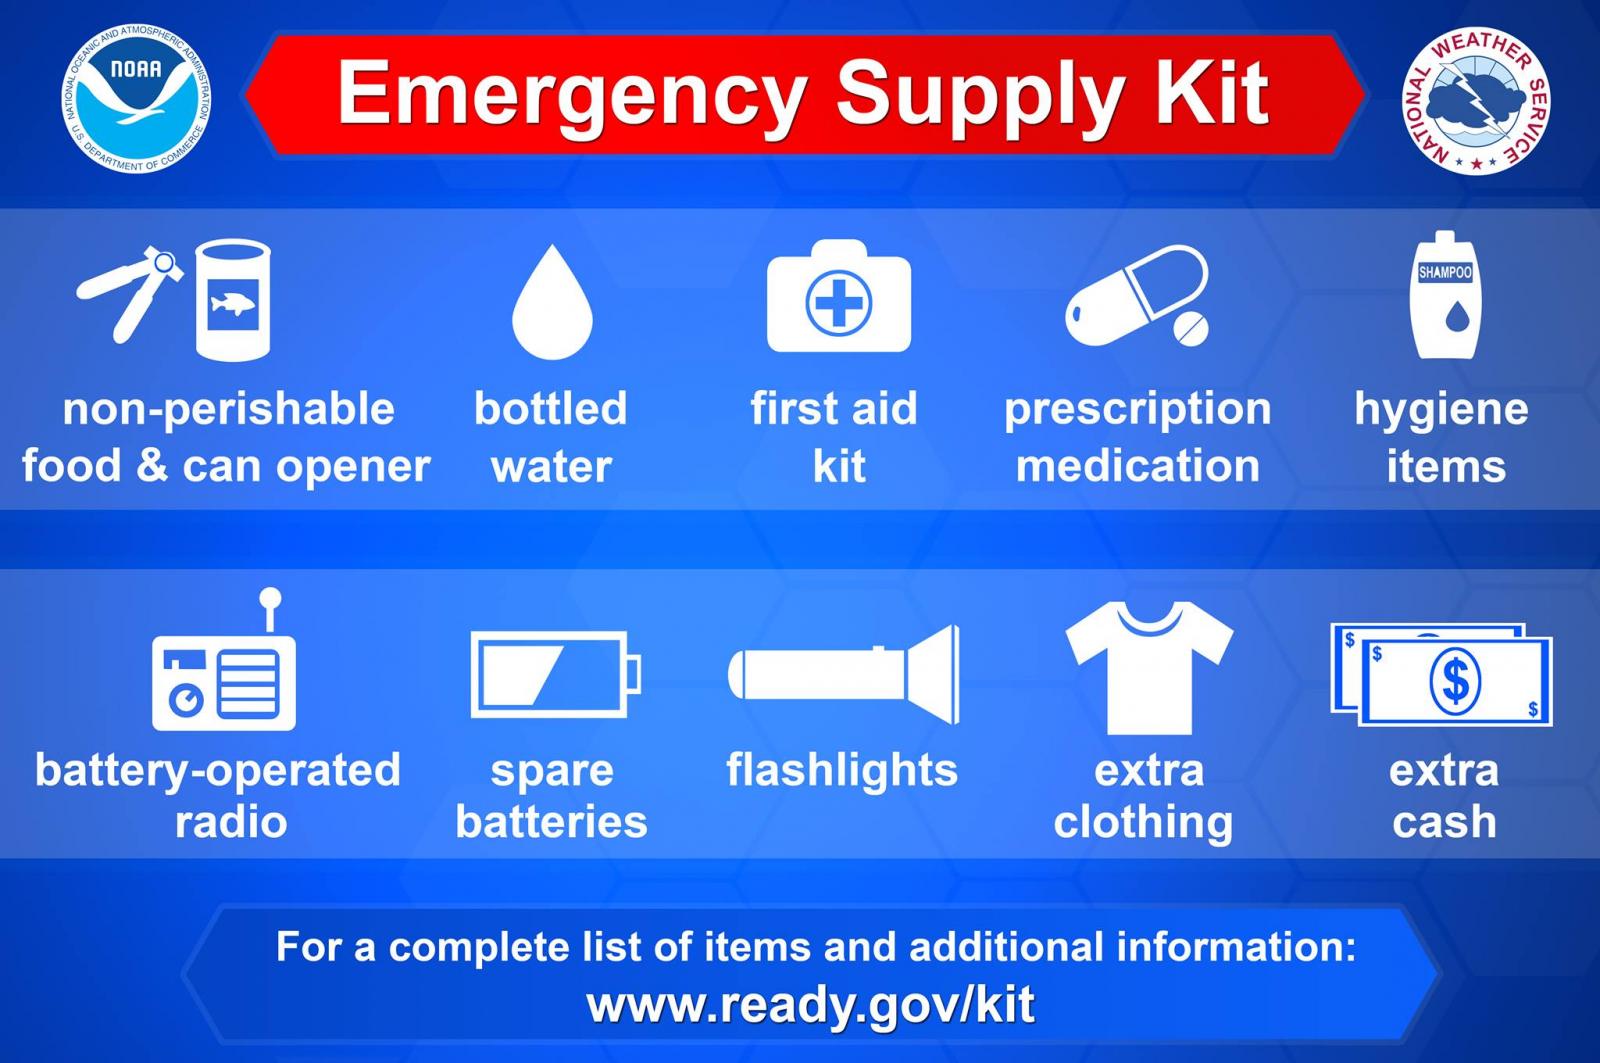 An infographic depicting emergency plan supplies: non-perishable food and a can opener, bottled water, first aid kit, prescription medication,  spare batteries, cash, extra clothing, flashlight, and more.